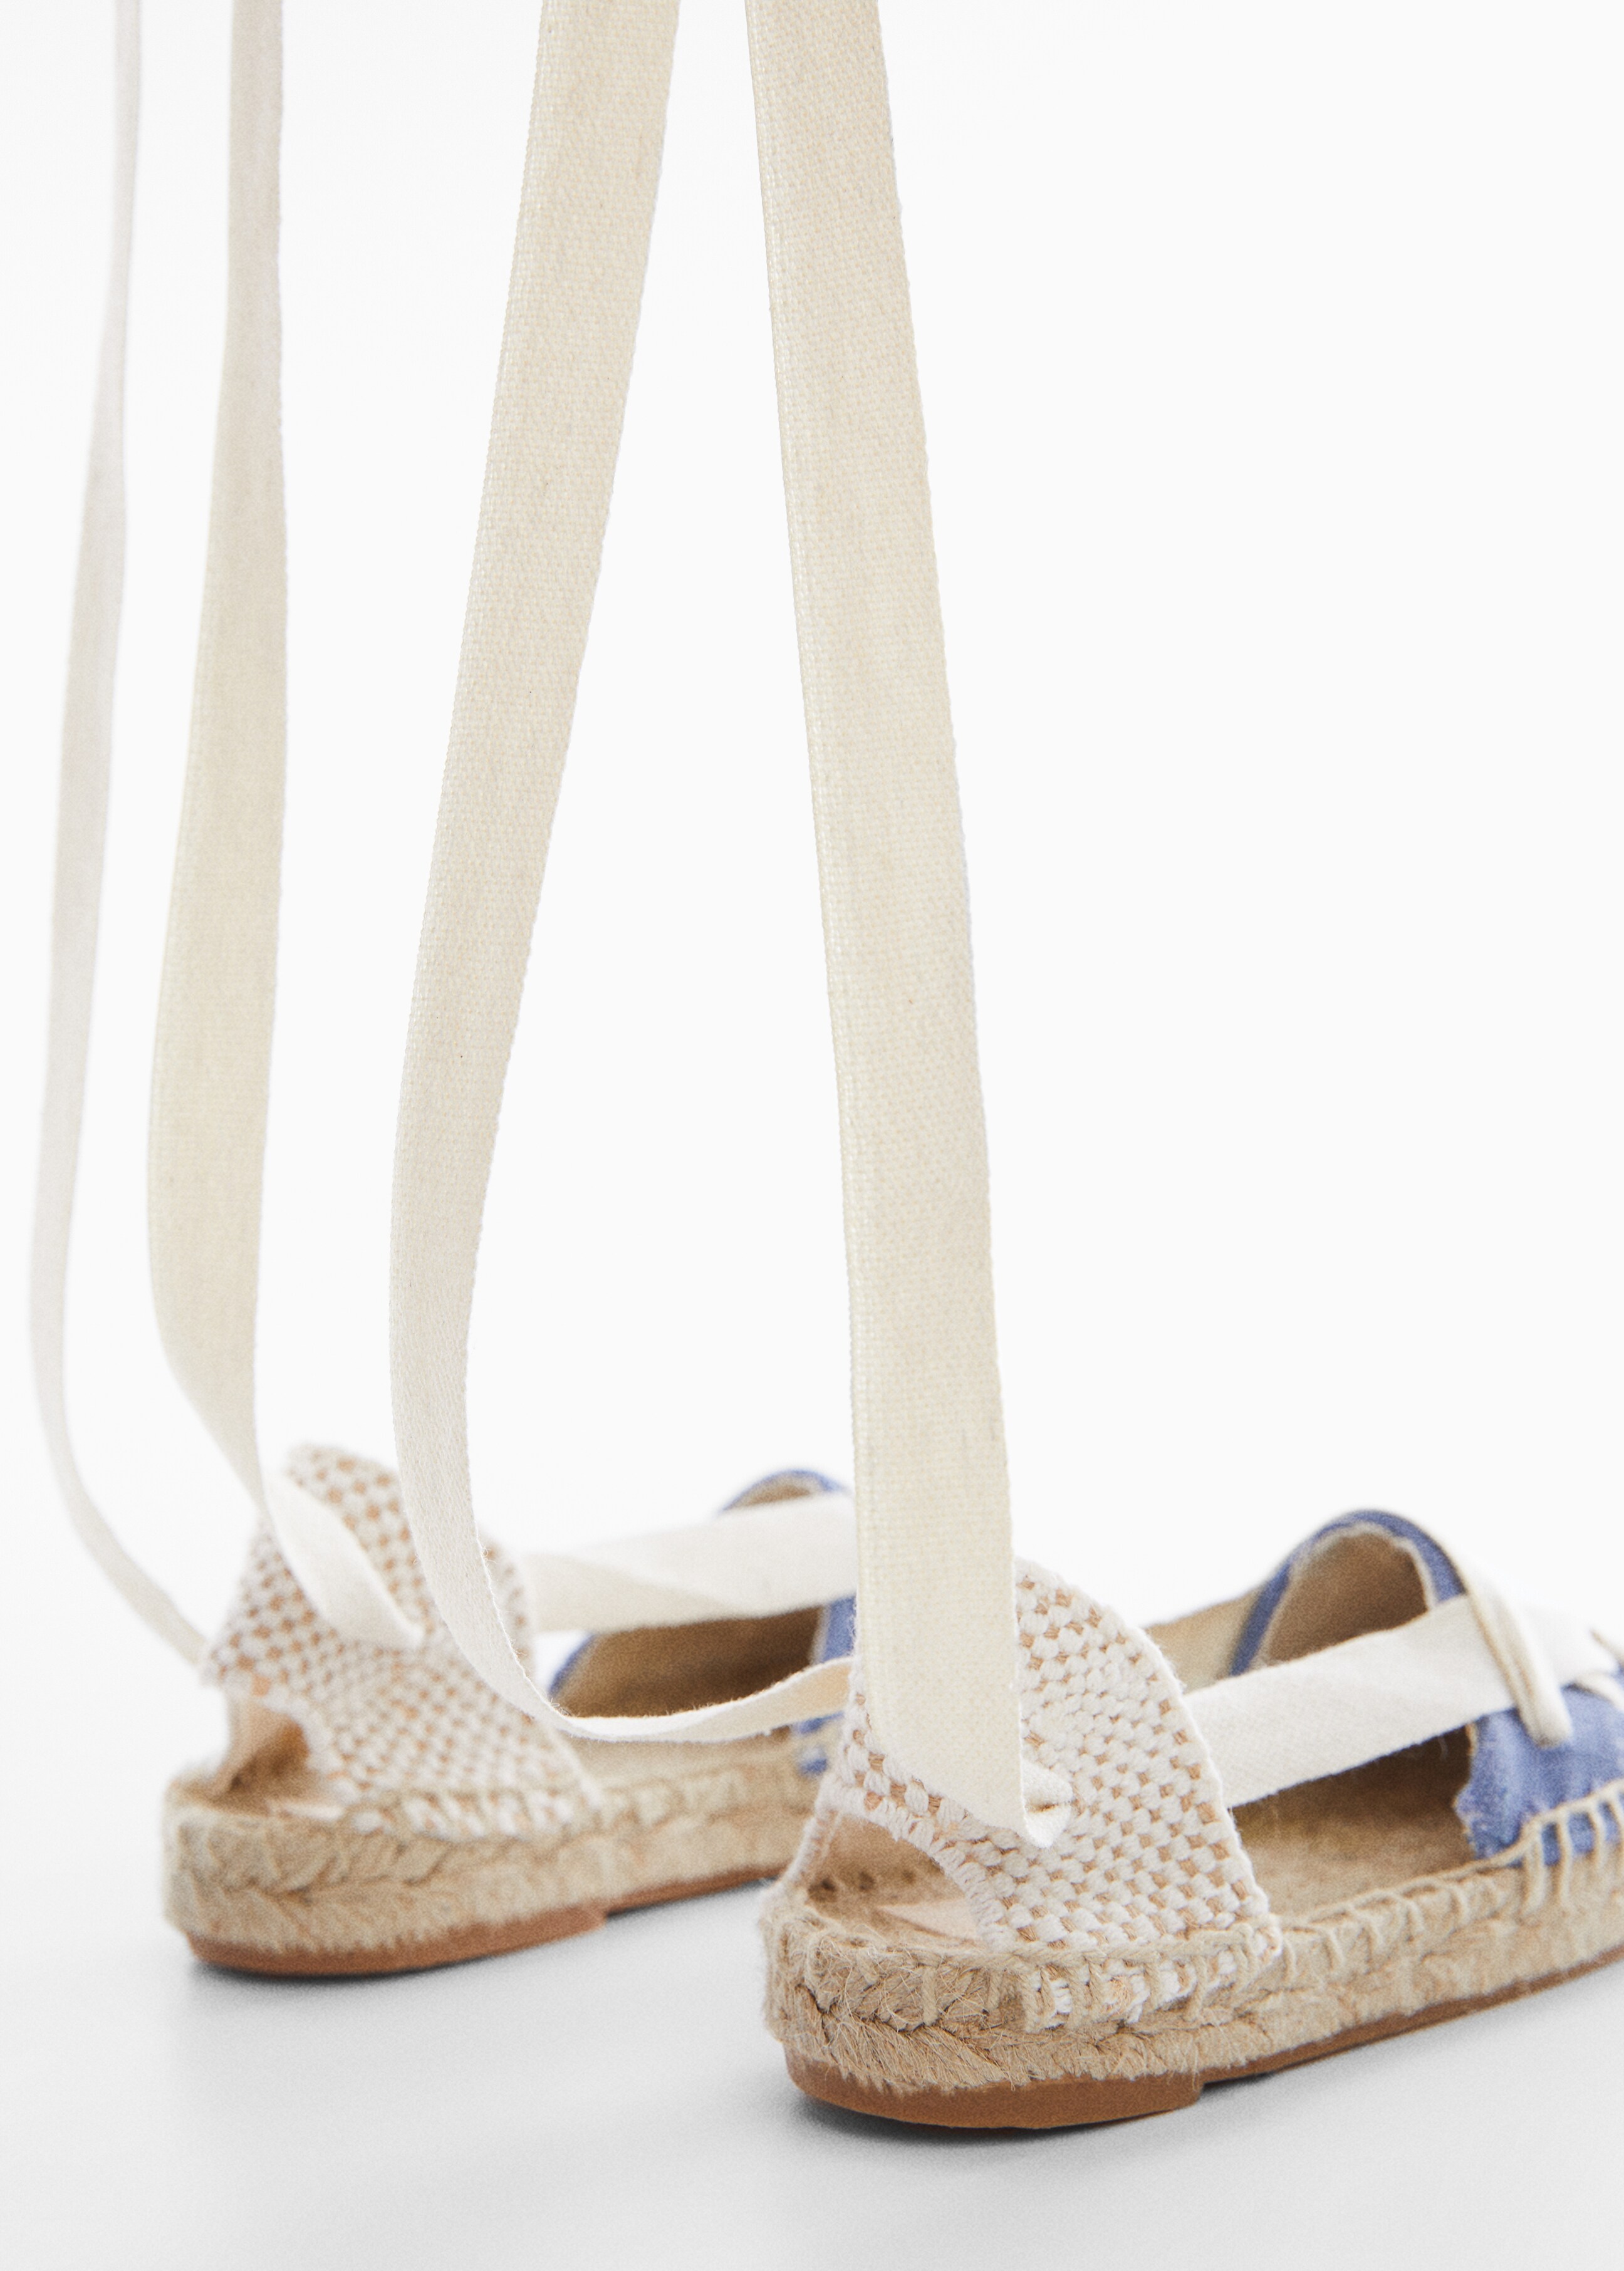 Espadrille ties - Details of the article 1